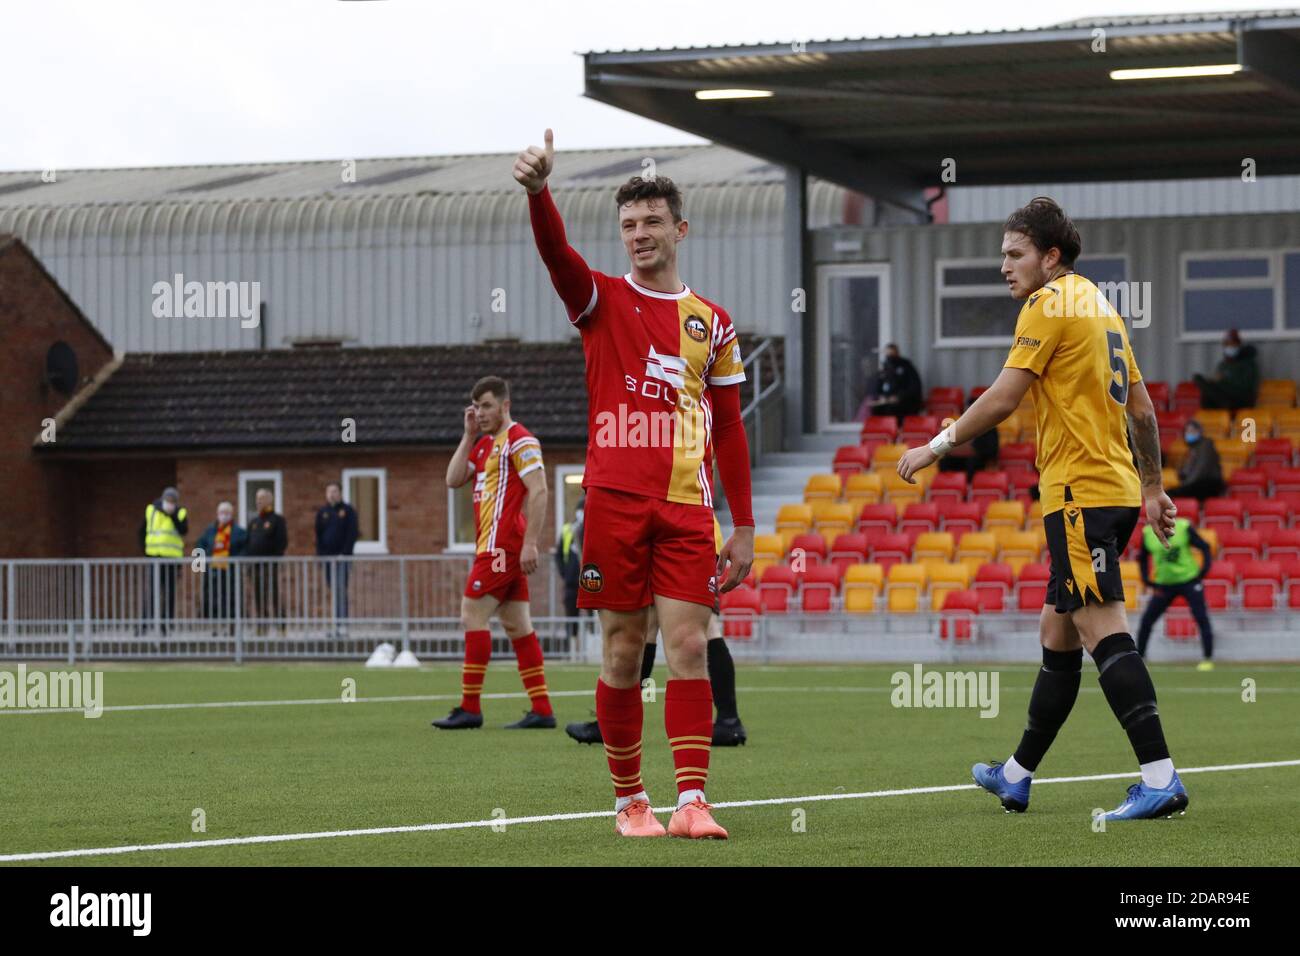 Gloucester, UK. 14th Nov, 2020. Matt McClure (#10 Gloucester City AFC) smiles and sticks his thumb up during the Vanarama National League North game between Gloucester City AFC and Bradford (Park Avenue) AFC at New Meadow Park in Gloucester. Kieran Riley/SSP Credit: SPP Sport Press Photo. /Alamy Live News Stock Photo